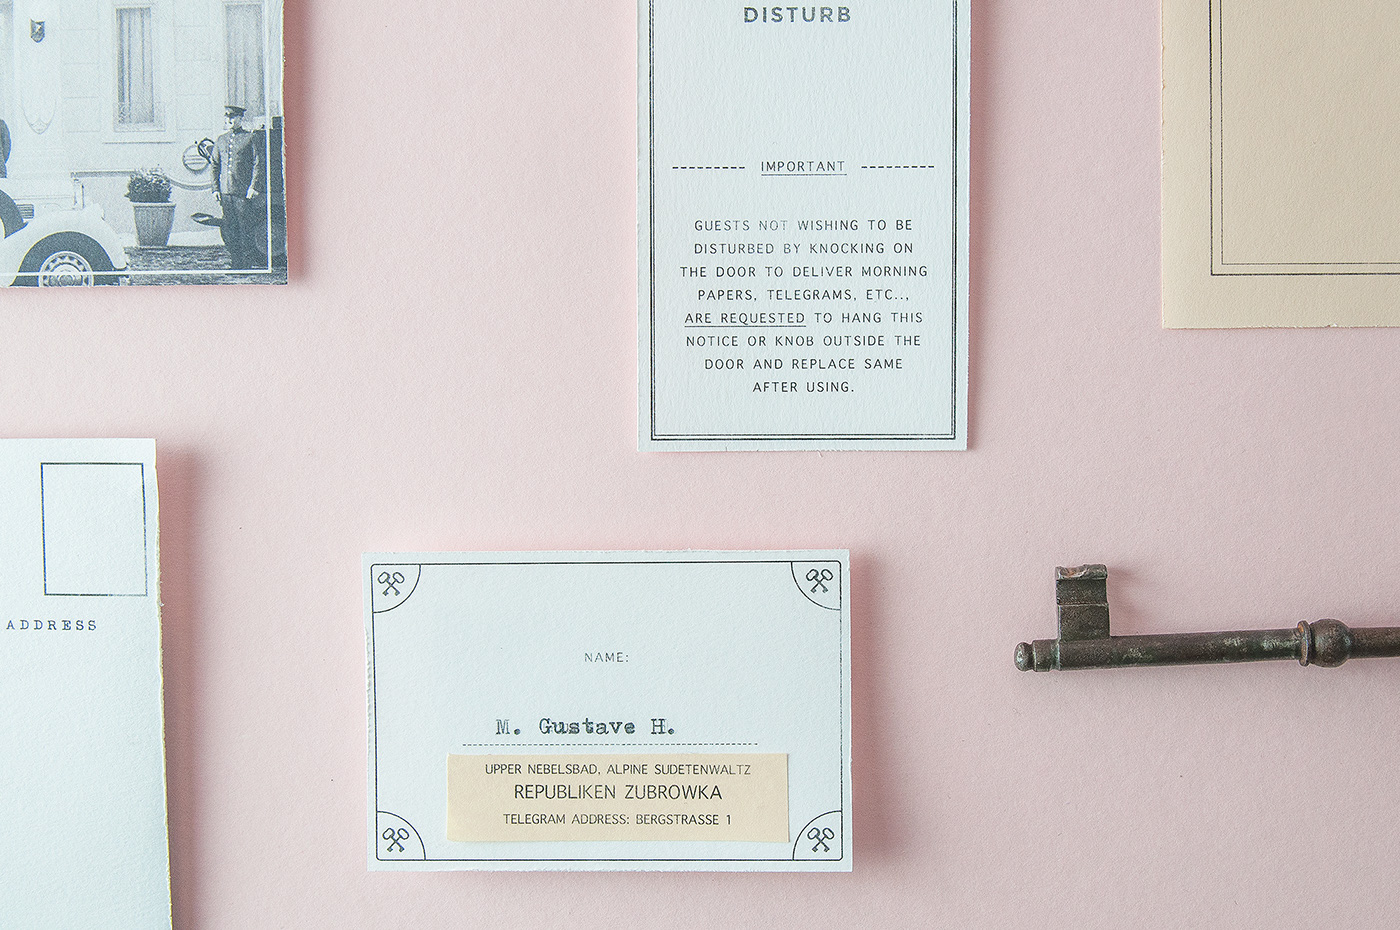 grand budapest hotel wes anderson grand budapest hotel identity Layout Event